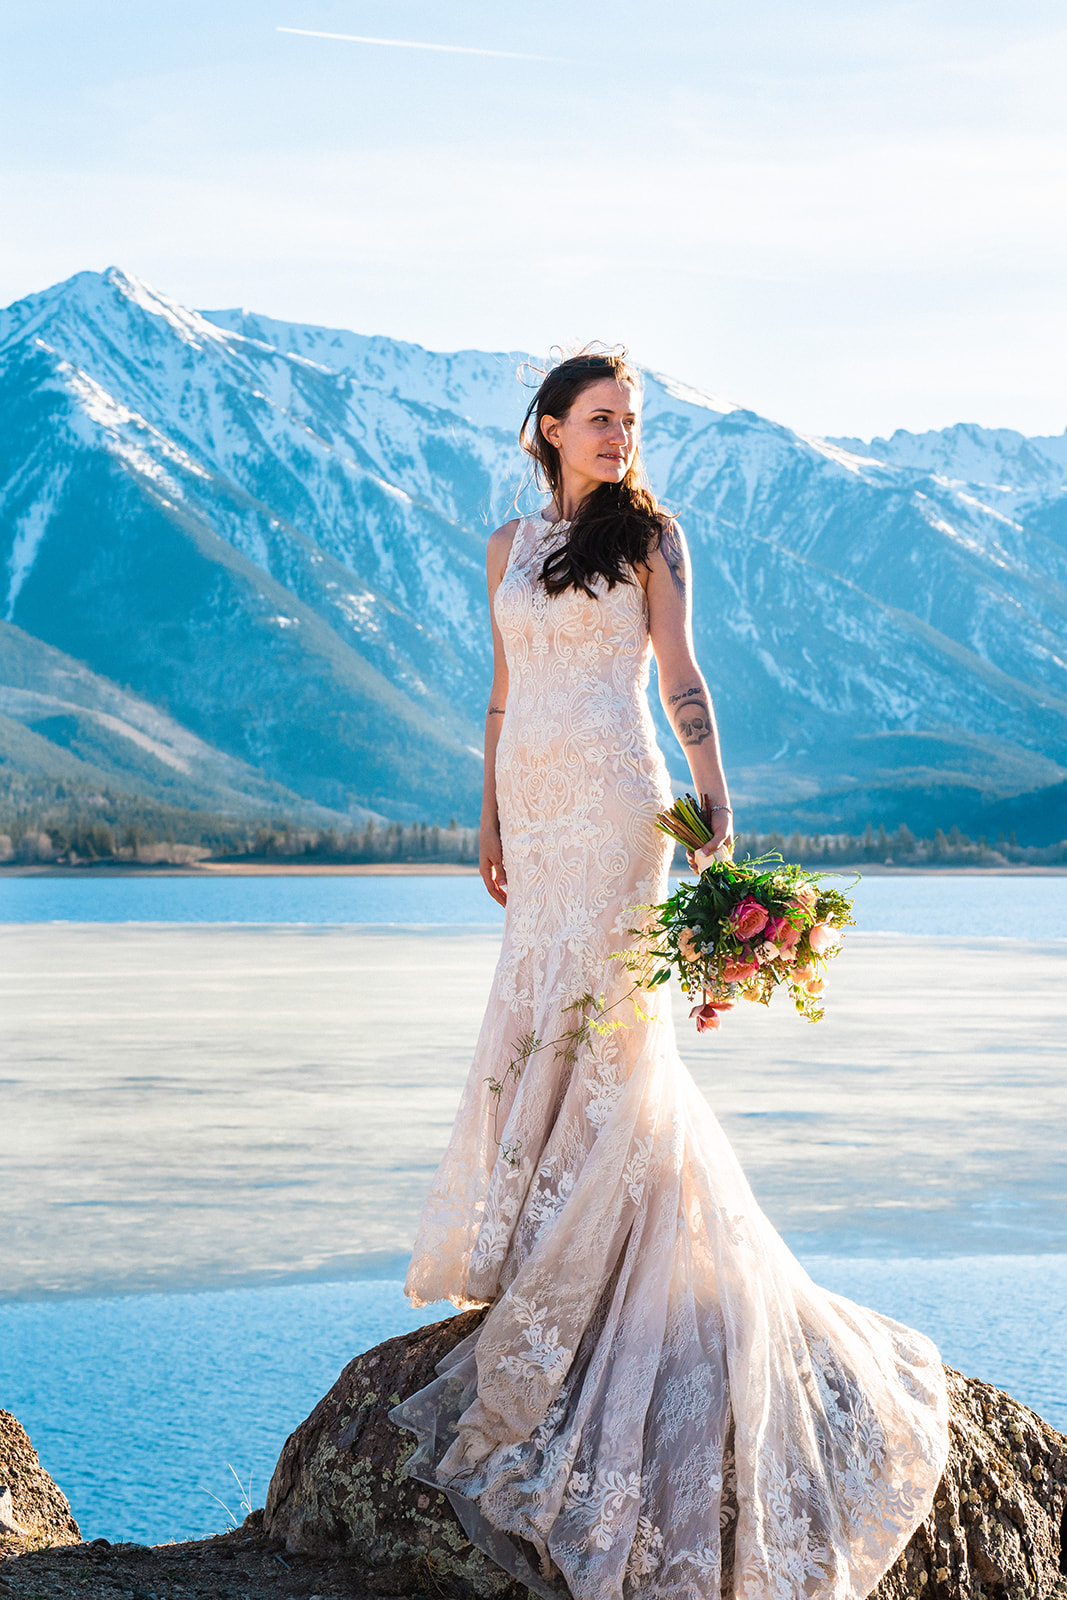 Stunning bride posing in front of Twin Lakes in a beautiful lace A-line elopement dress